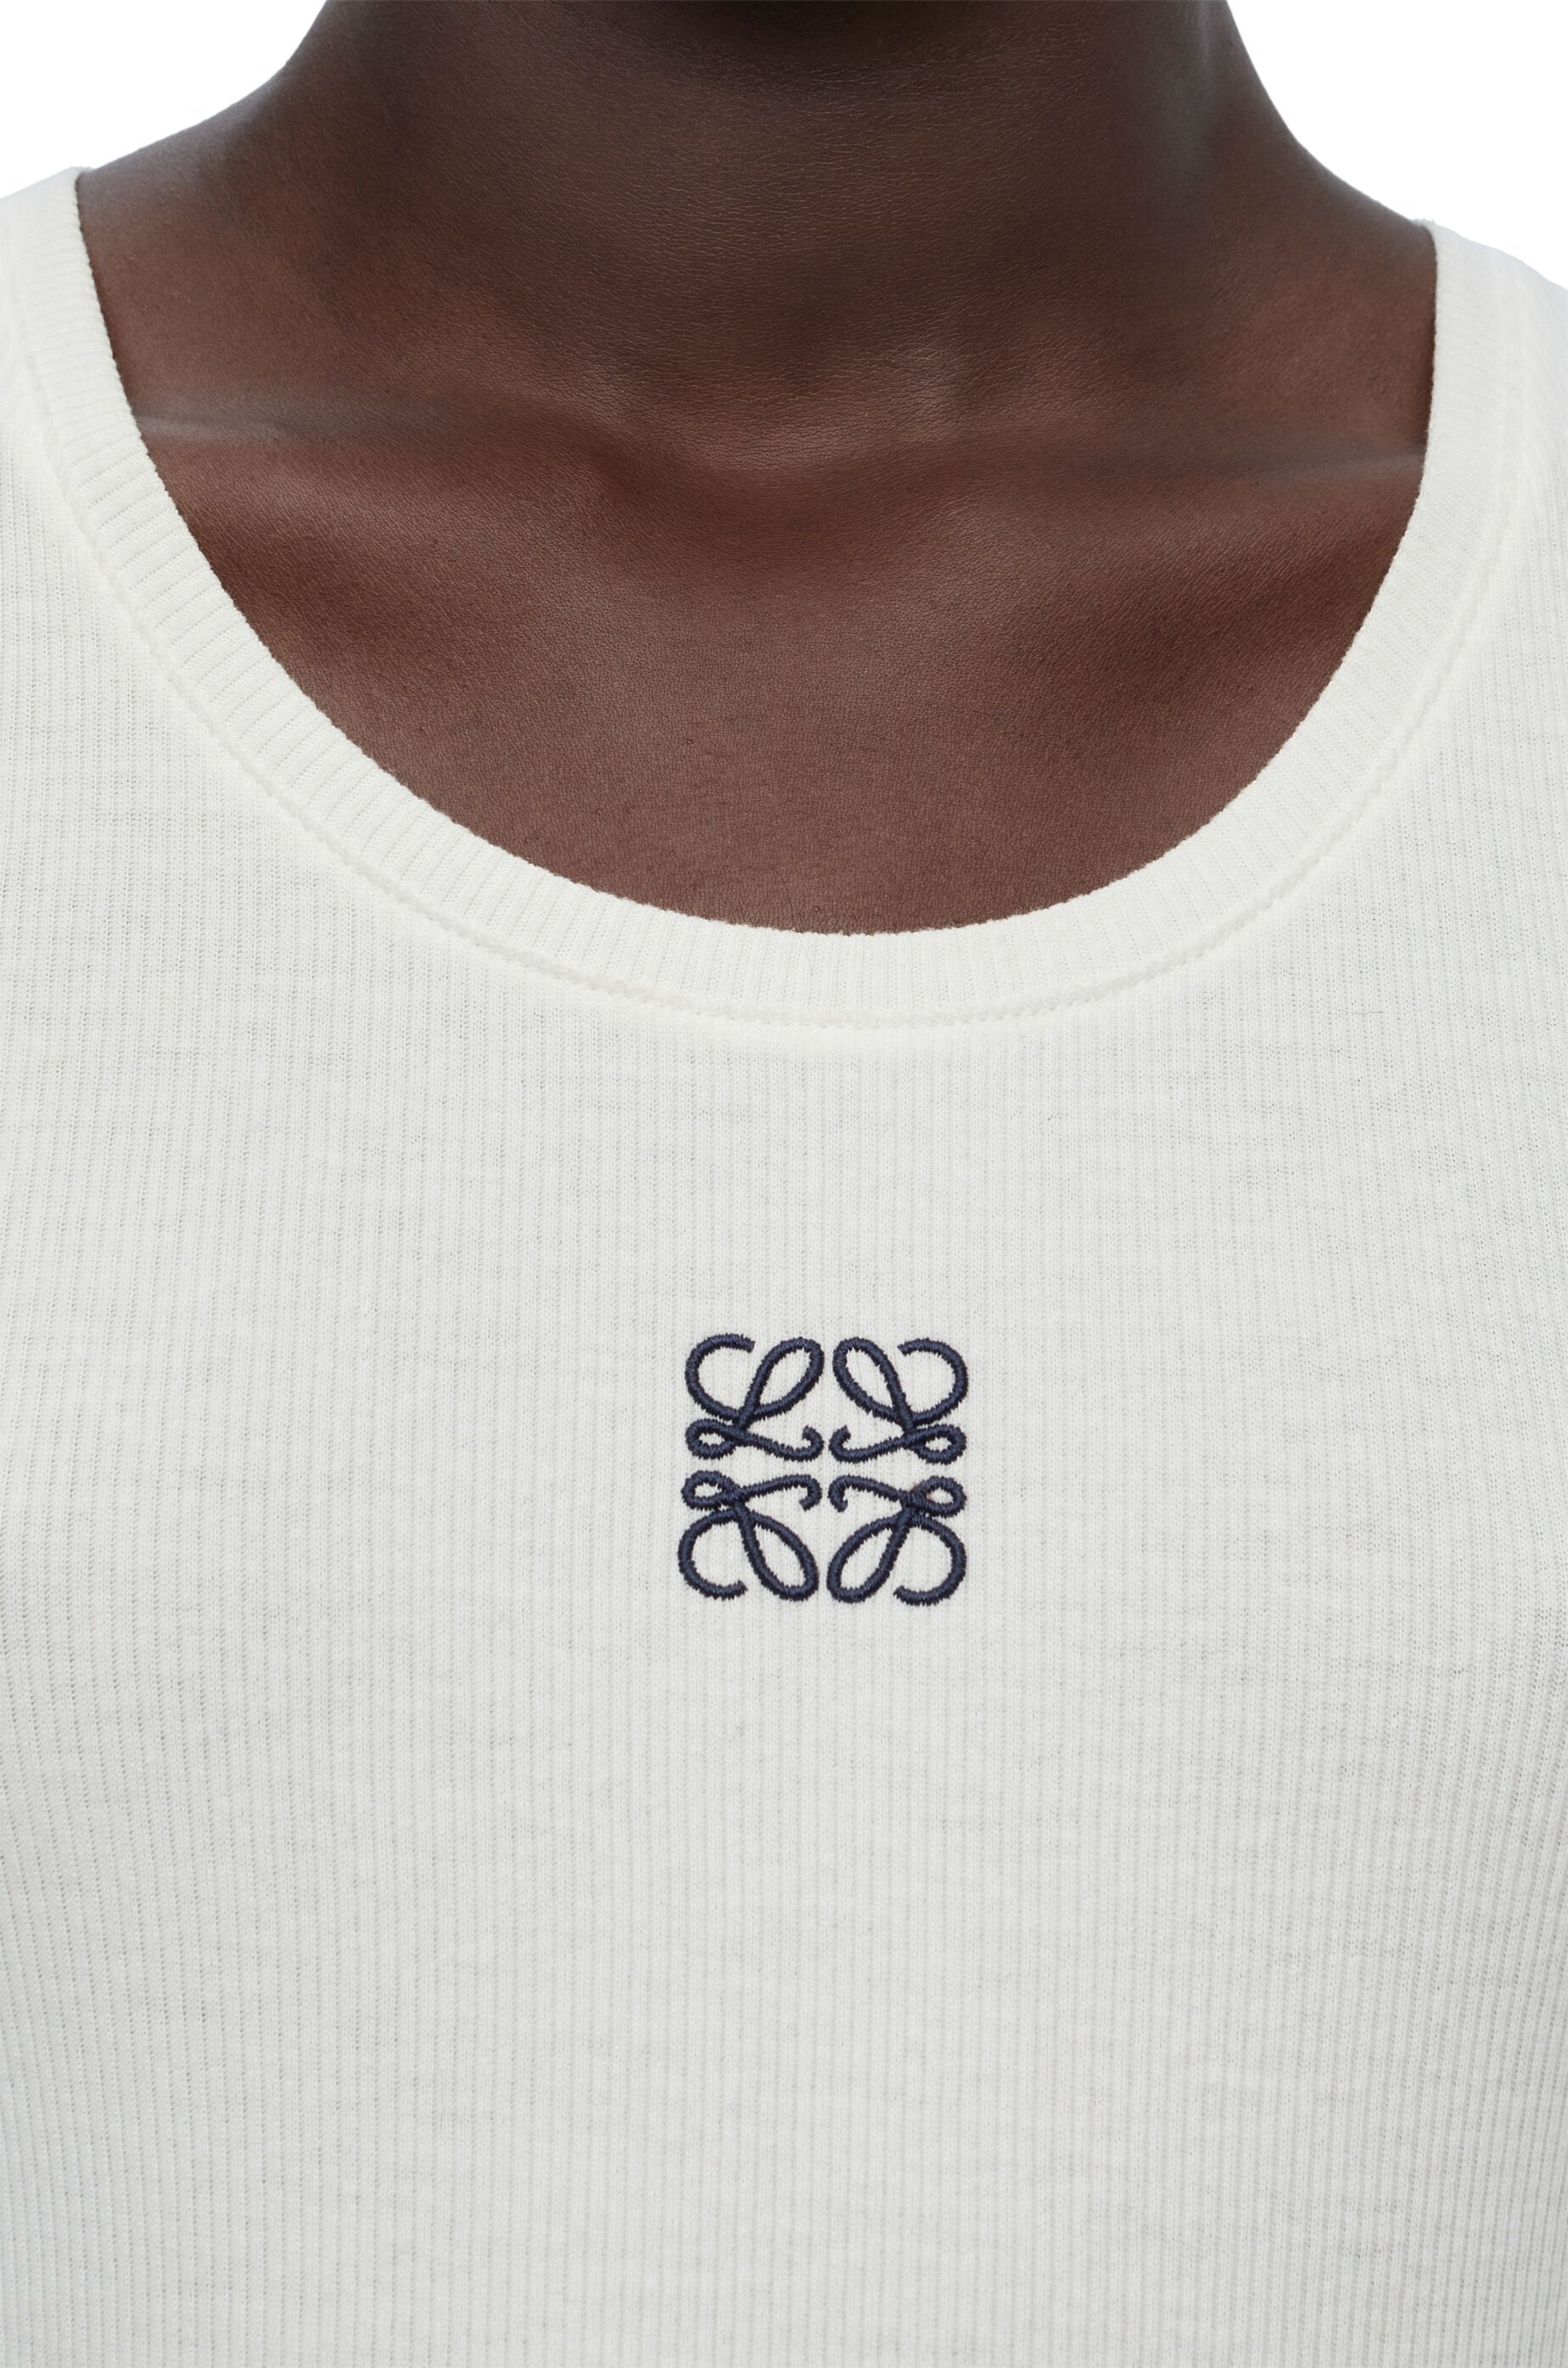 Something Borrowed. White ribbed tank top with LOEWE logo embroidery.